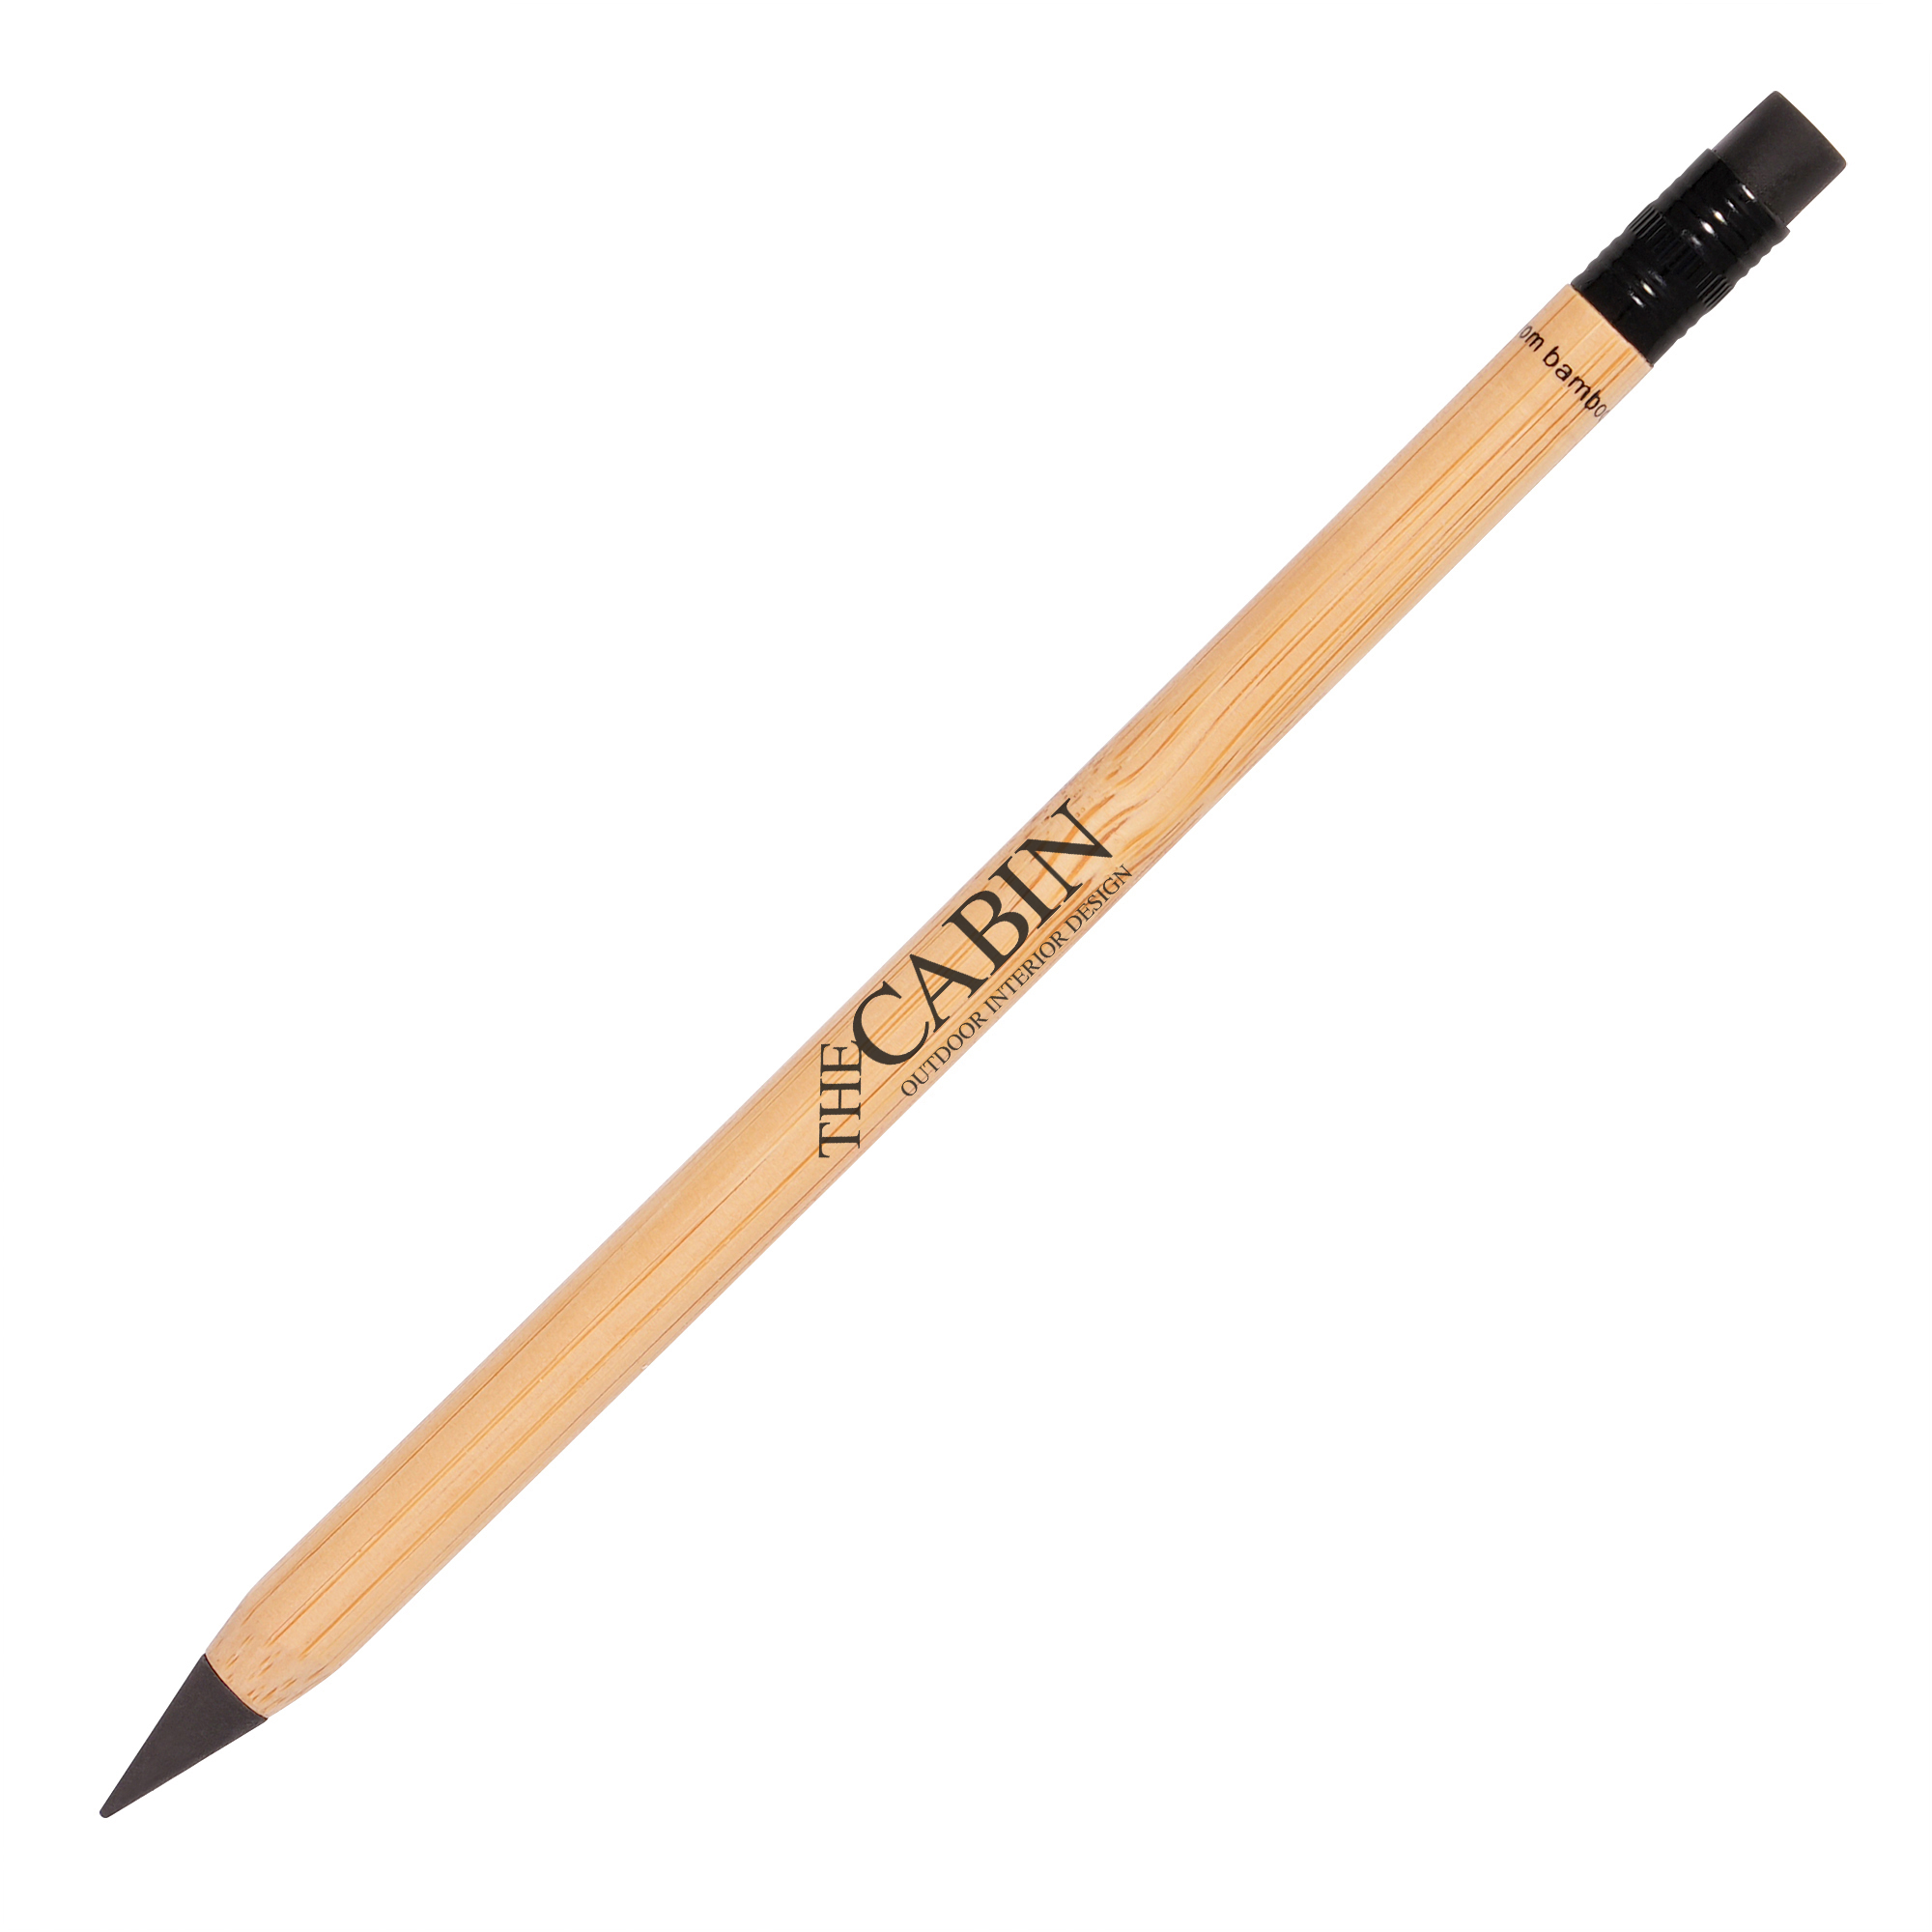 An eco-friendly bamboo pencil with eraser. The 99% graphite nib can be used time and time again without wearing down. Supplied with a pre-printed eco message, ‘made from bamboo’. Available with black or white eraser.